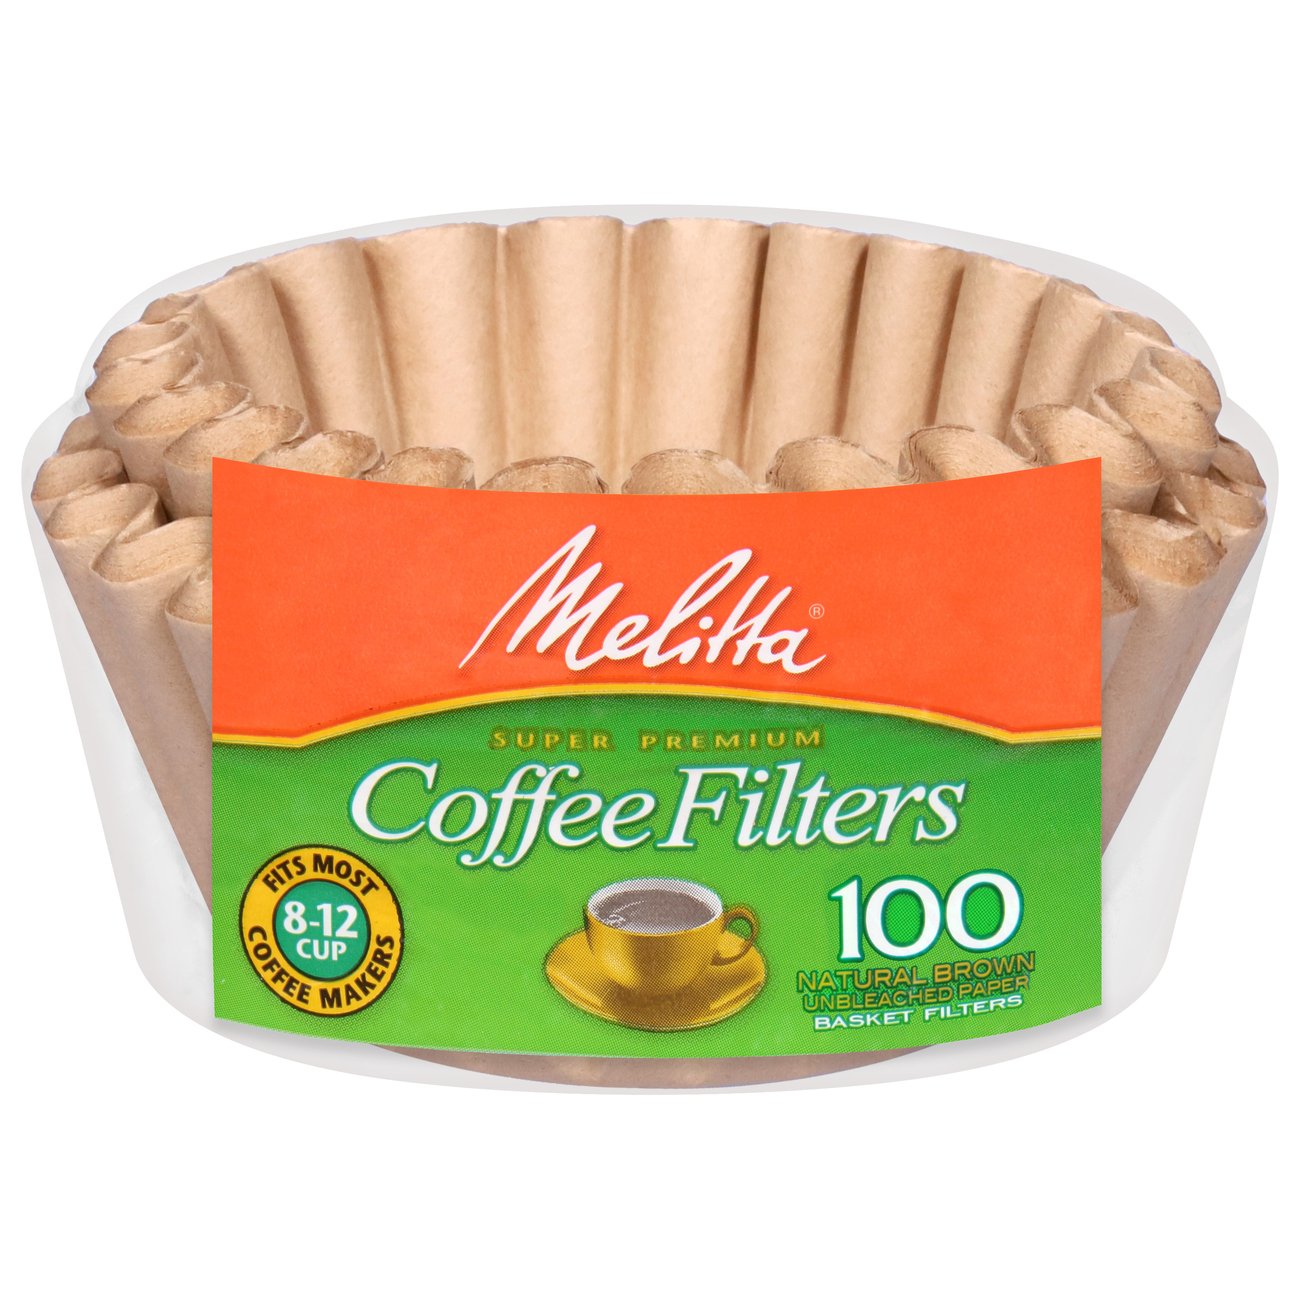 Tupkee Coffee Filters 8-12 Cups - 600 Count, Basket Style, Natural Bro